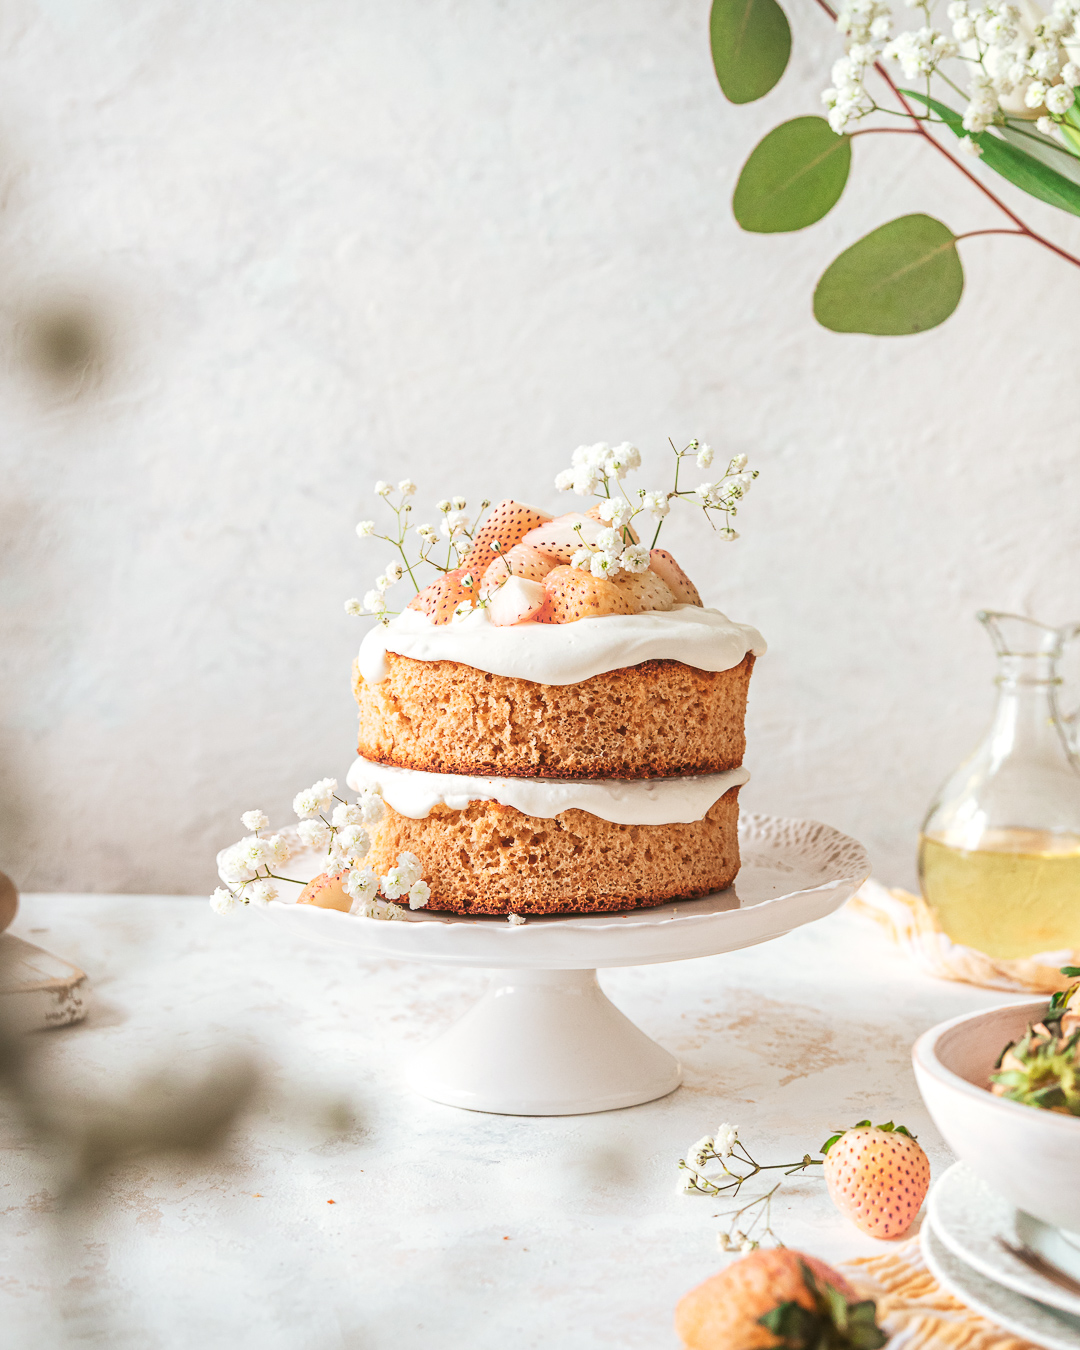 Styling simple cakes with flowers